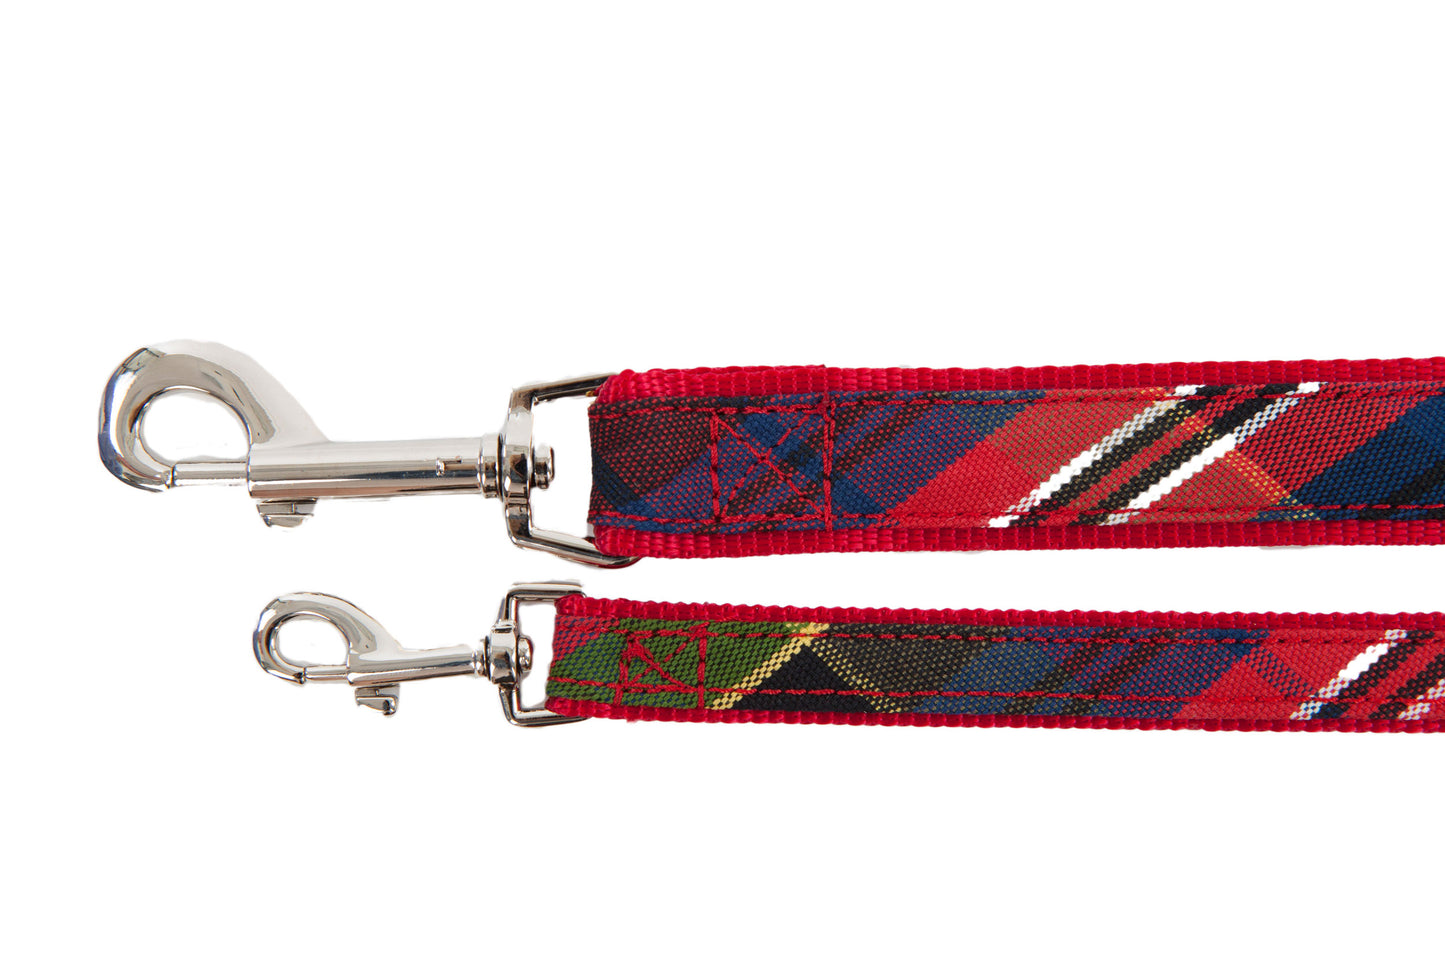 Designer Collection - Dog Collars, Harnesses, Leads - Red & Green Tartan